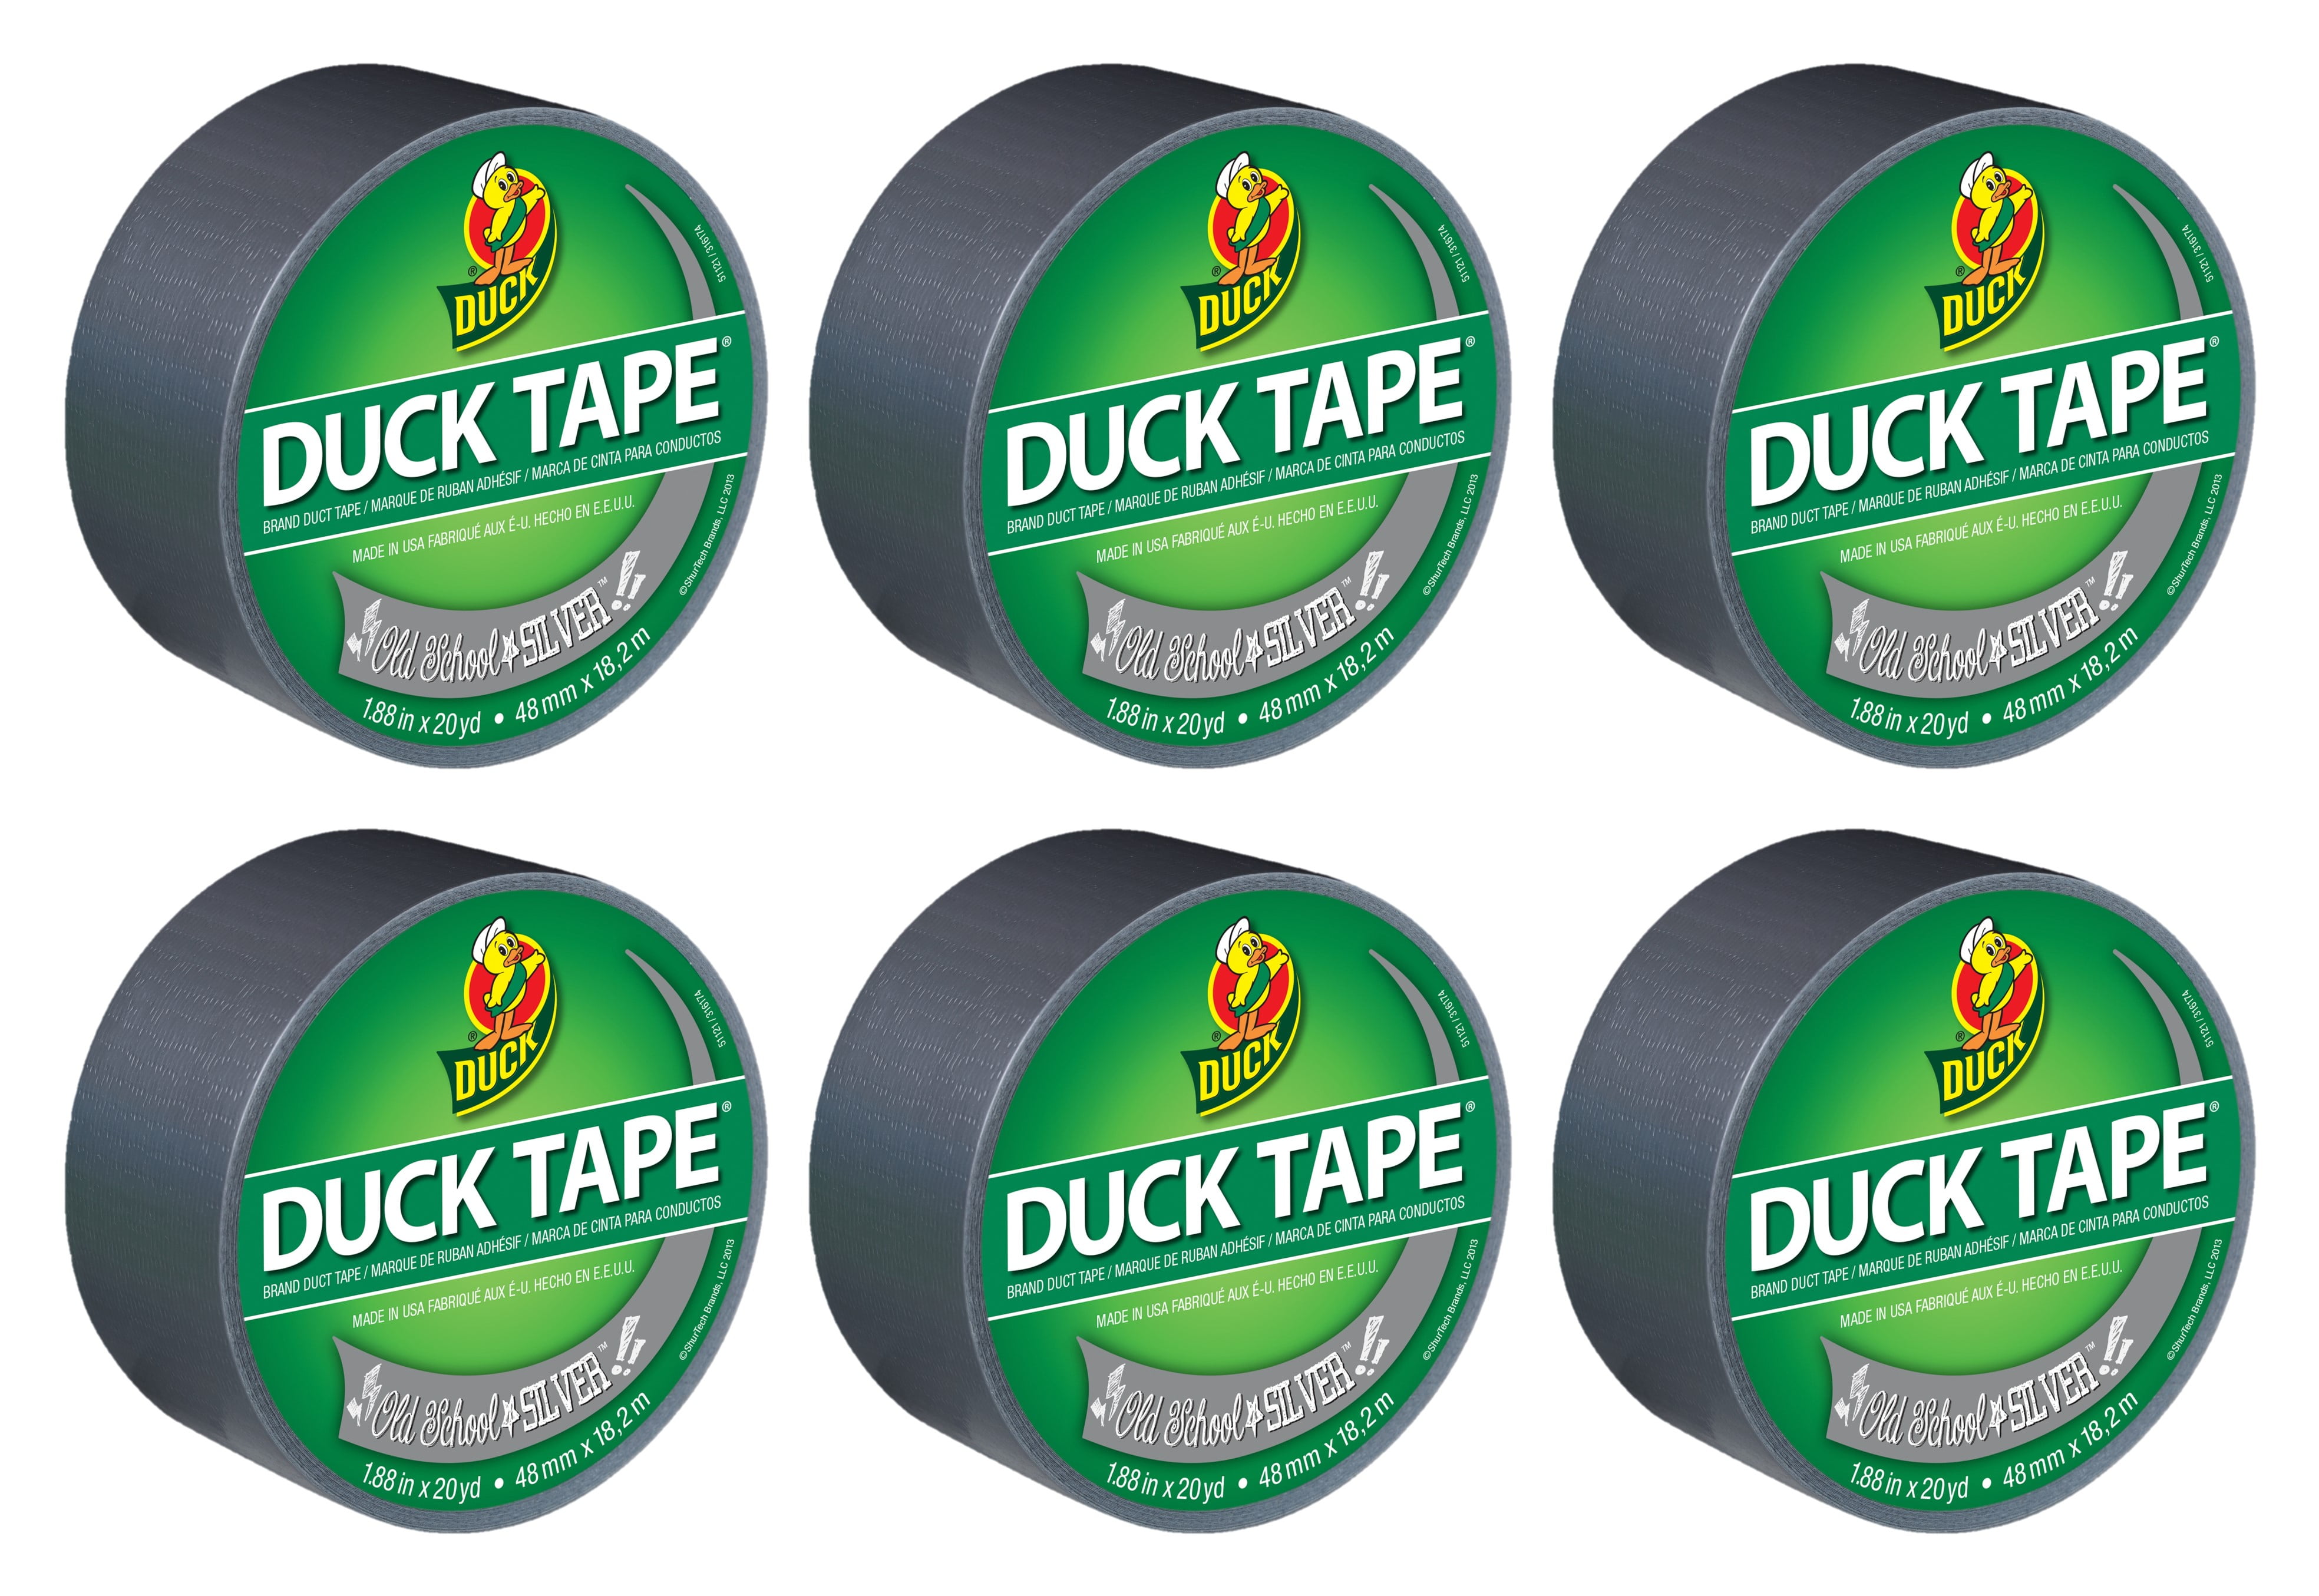 Lot Of Two- Color Duck Tape® Brand Duct Tape Neon Pink 1.88 in. x